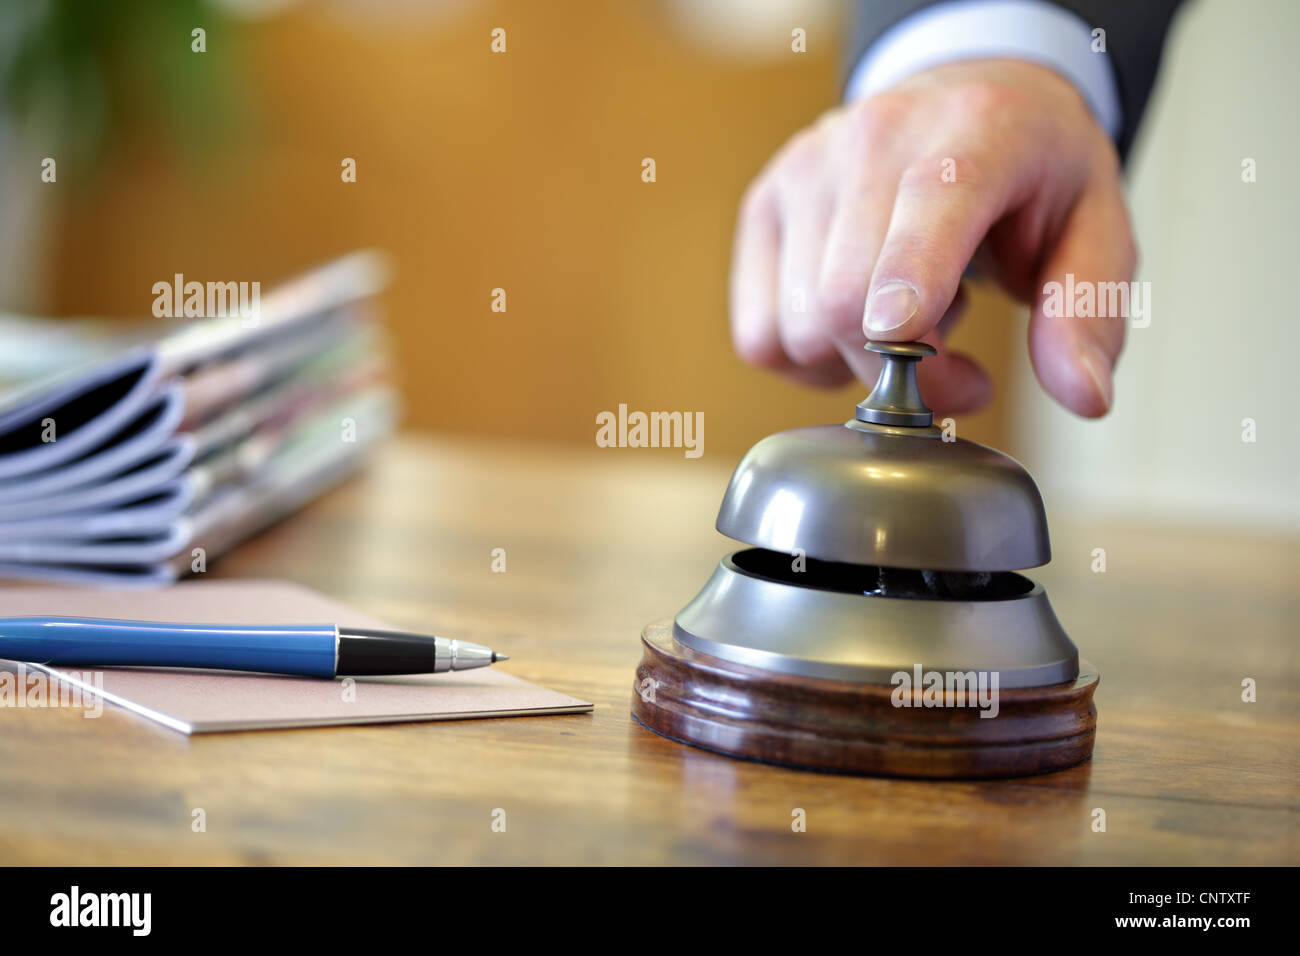 Hotel service bell Stock Photo